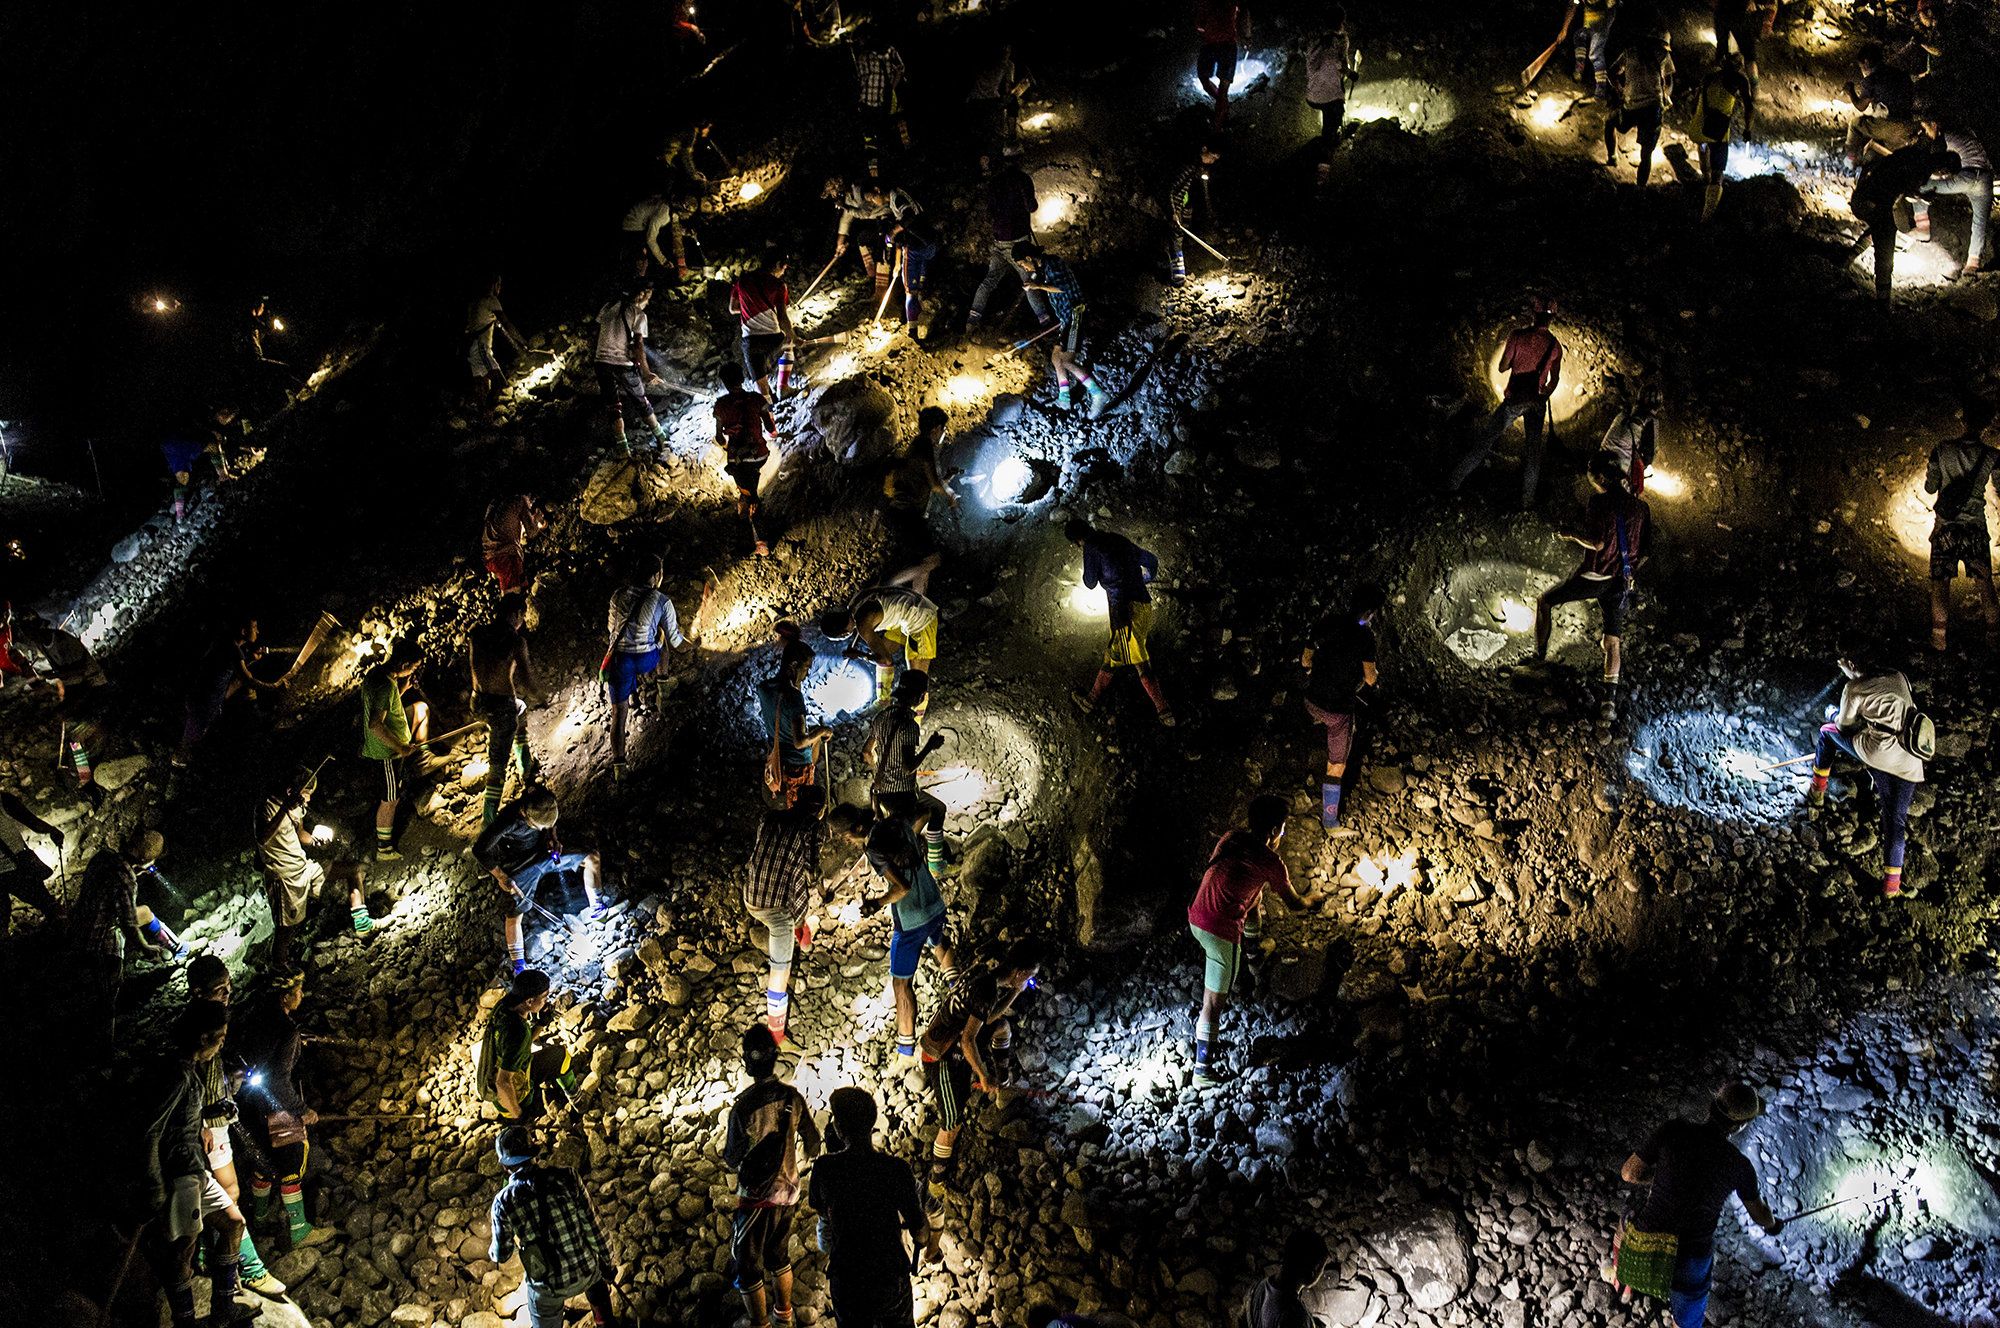 Freelance miners use flashlights to search for jade at night, during company off-hours, in Hpakant in 2019. Image by Hkun Lat. Myanmar, 2019.